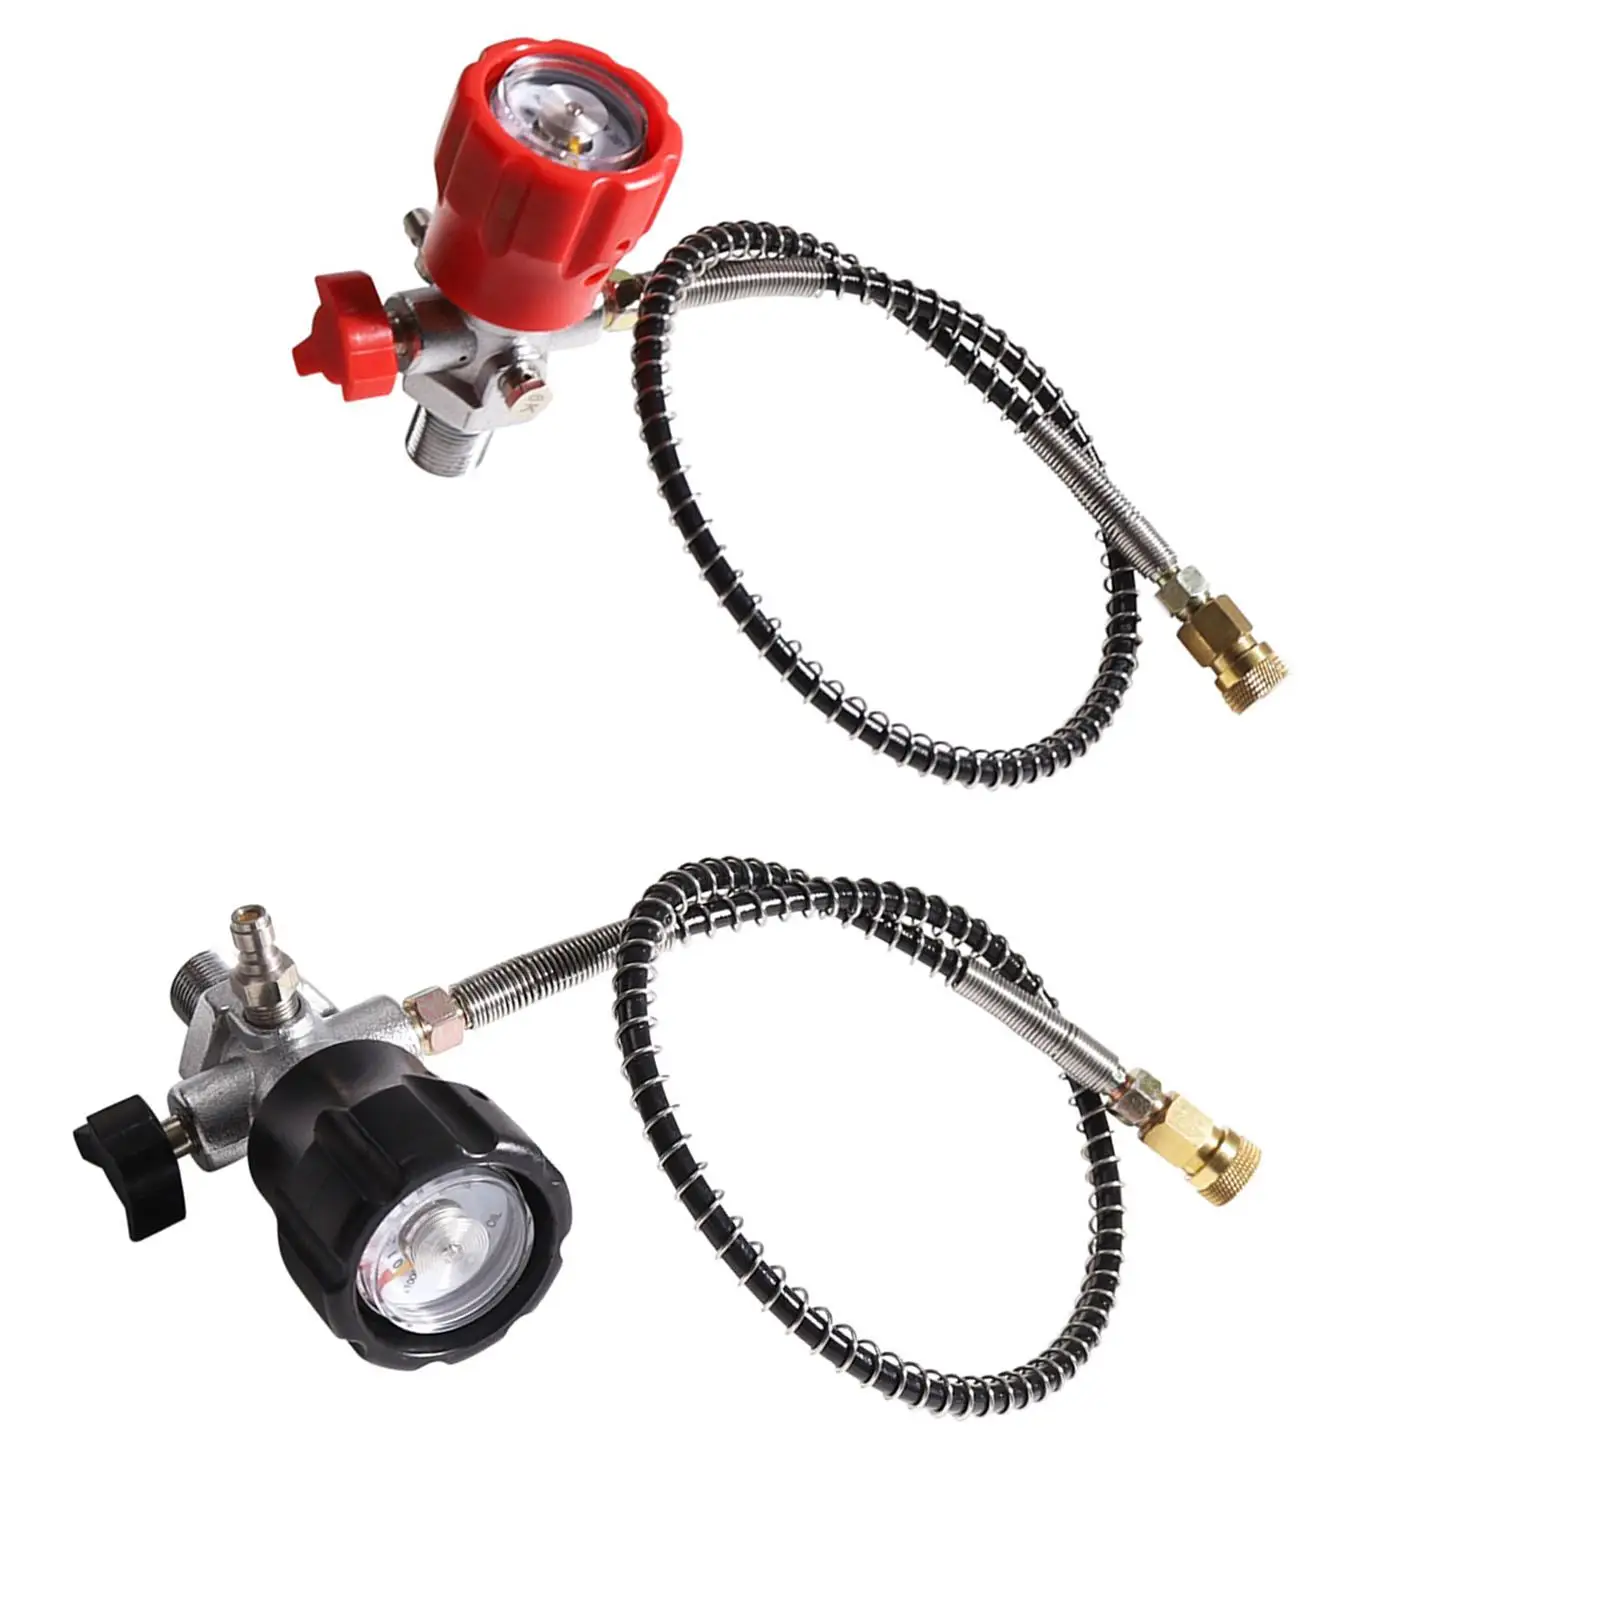 Fill Station Charging Adapter 24inch Hose Fill Station Kit Air Filling Station Refill Adapter for Scuba Adapter Cylinder Diving